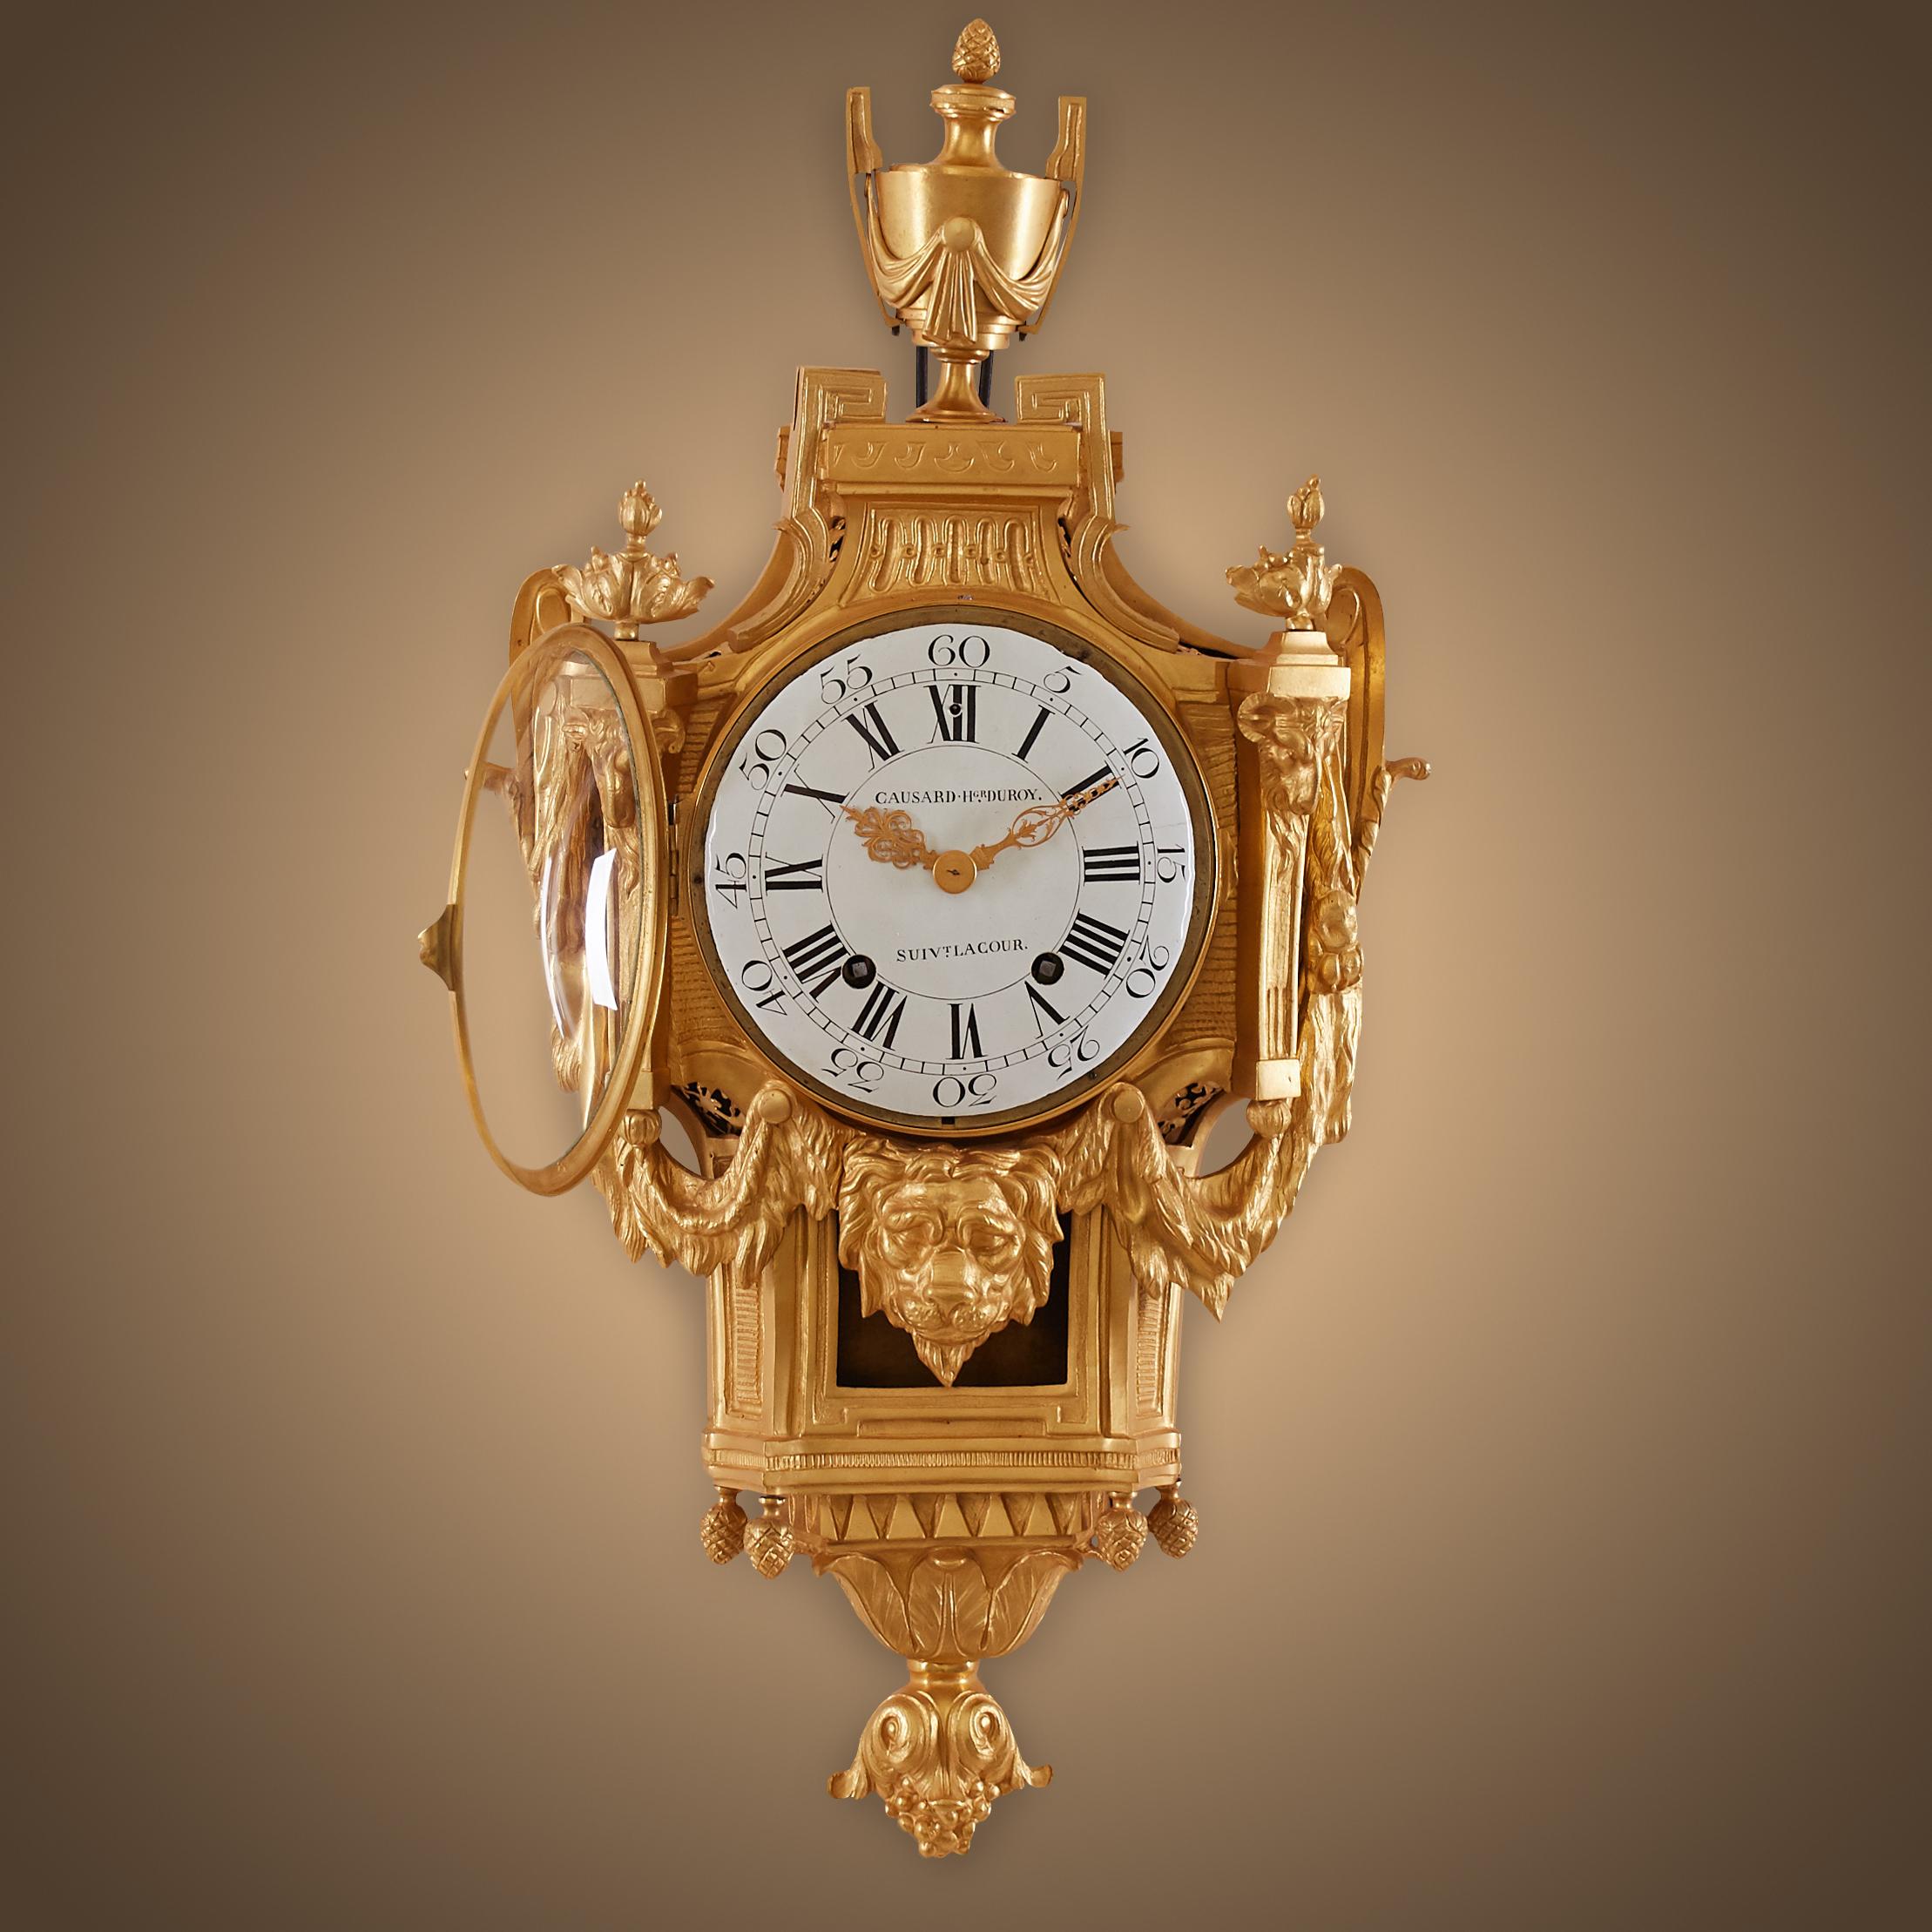 “A Louis XVI style lion mask wall clock”
This fire gilt bronze Louis XVI style lion mask wall clock was one of the most outstanding masterpieces, which was originally made by Edme-Jean Causard – one of the most well-known and professional